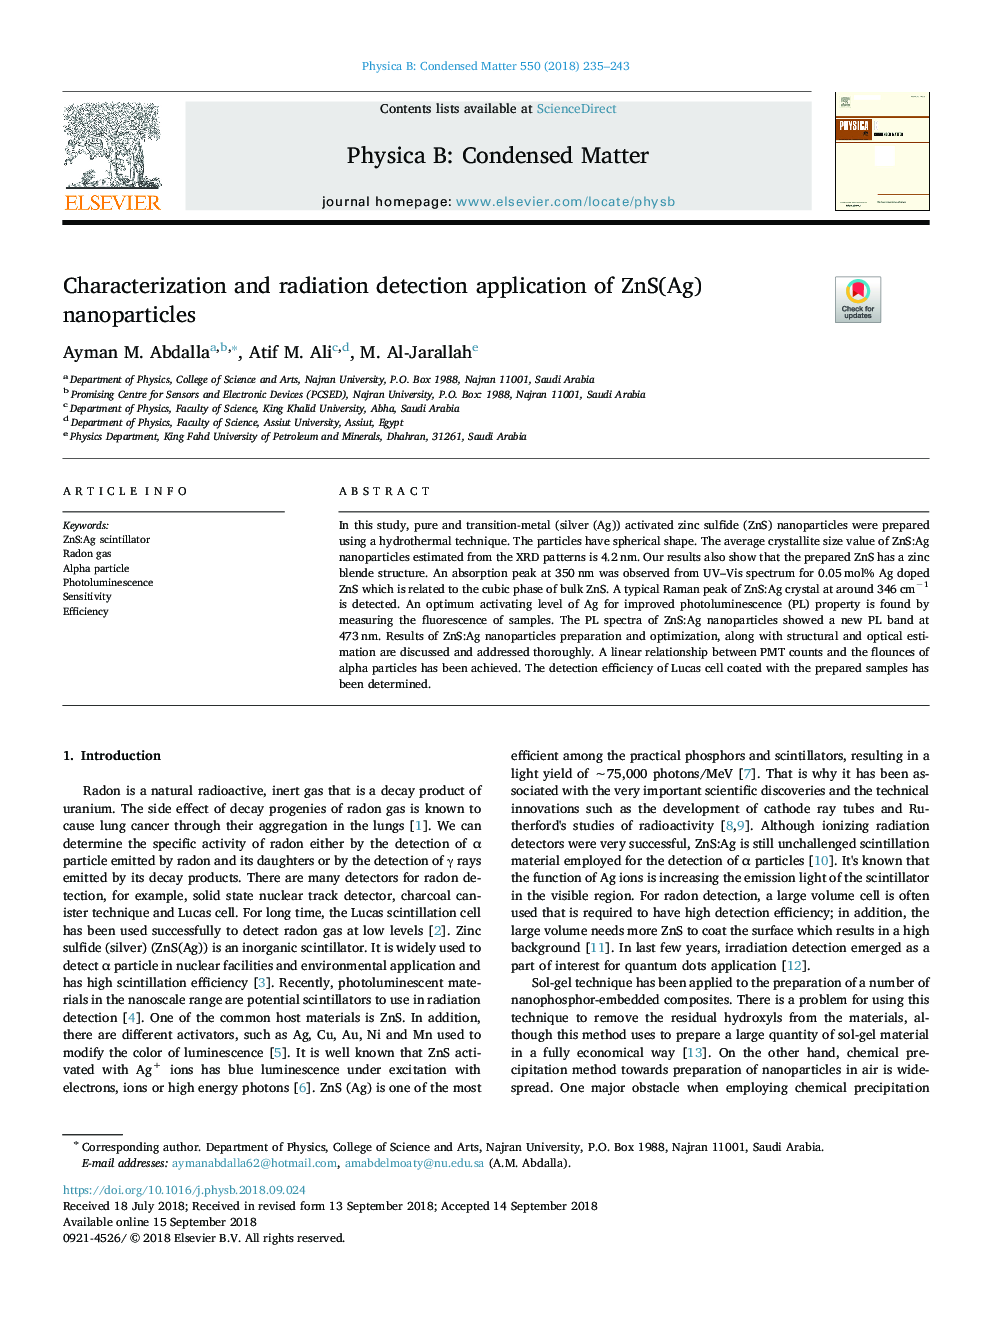 Characterization and radiation detection application of ZnS(Ag) nanoparticles